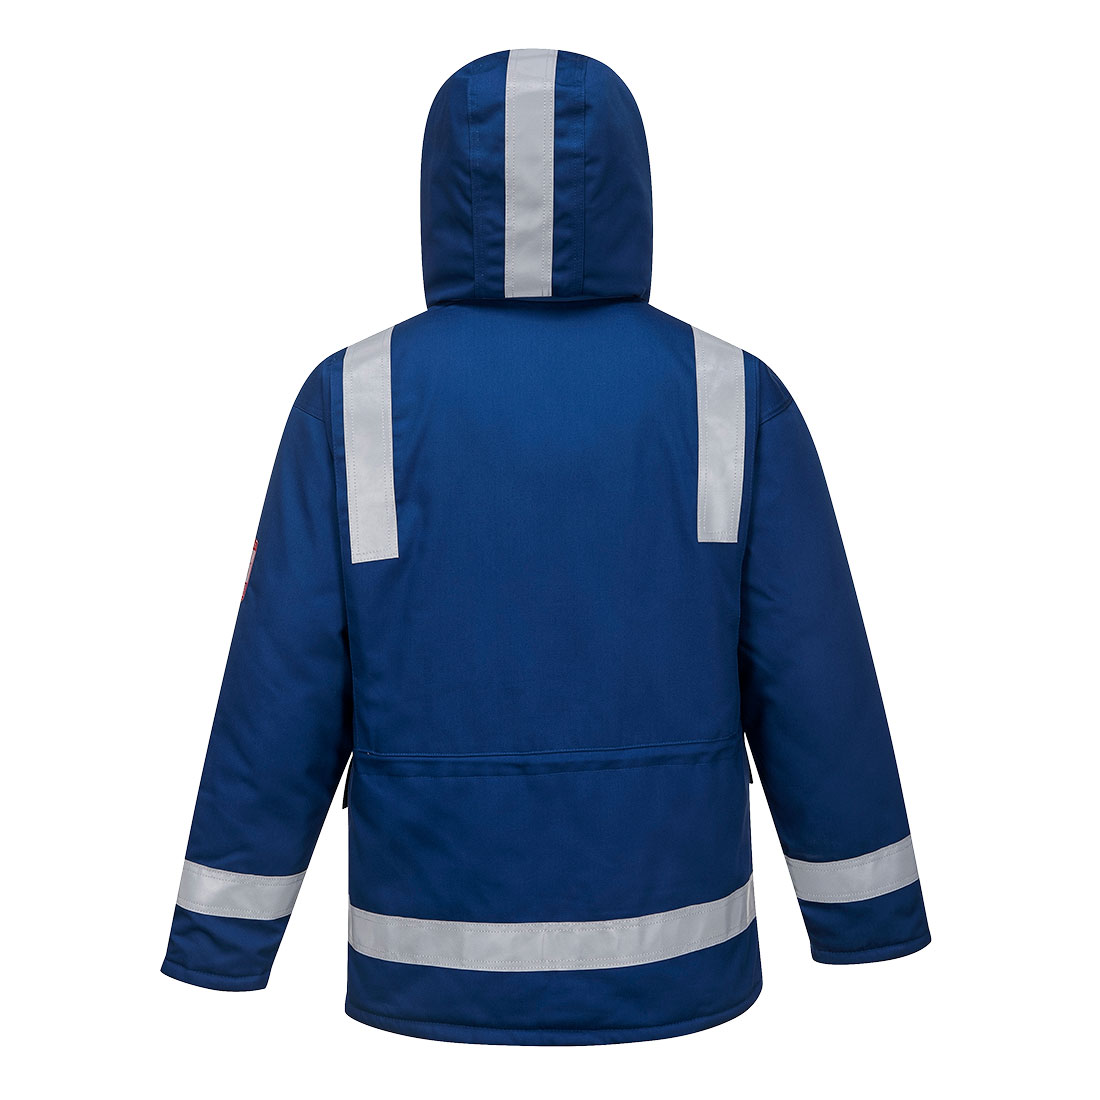 Flame Resistant Anti-Static Windproof Padded Winter Warming Jacket